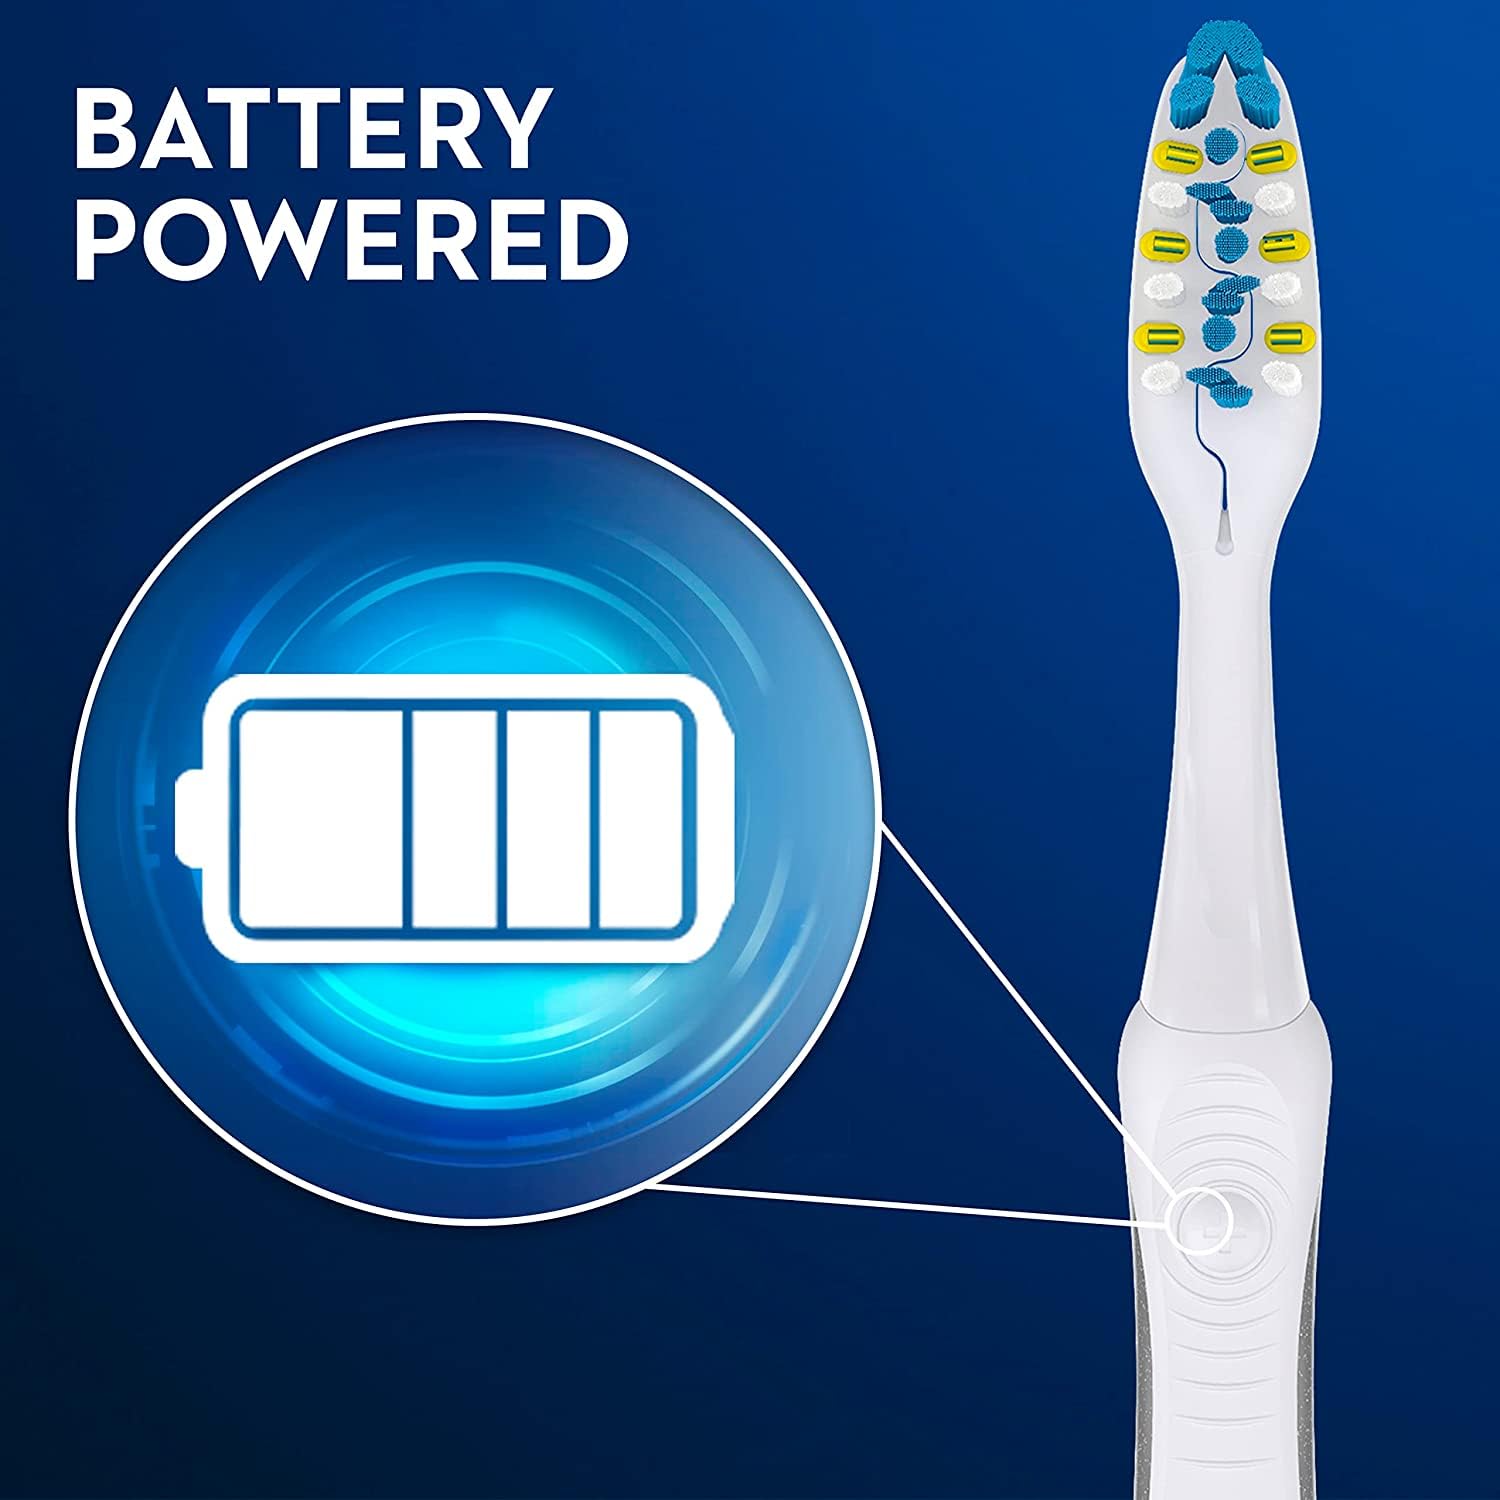 Oral-B Pulsar 3D White Pulsar Battery Toothbrush, Soft, 2 Count (Colors May Vary)